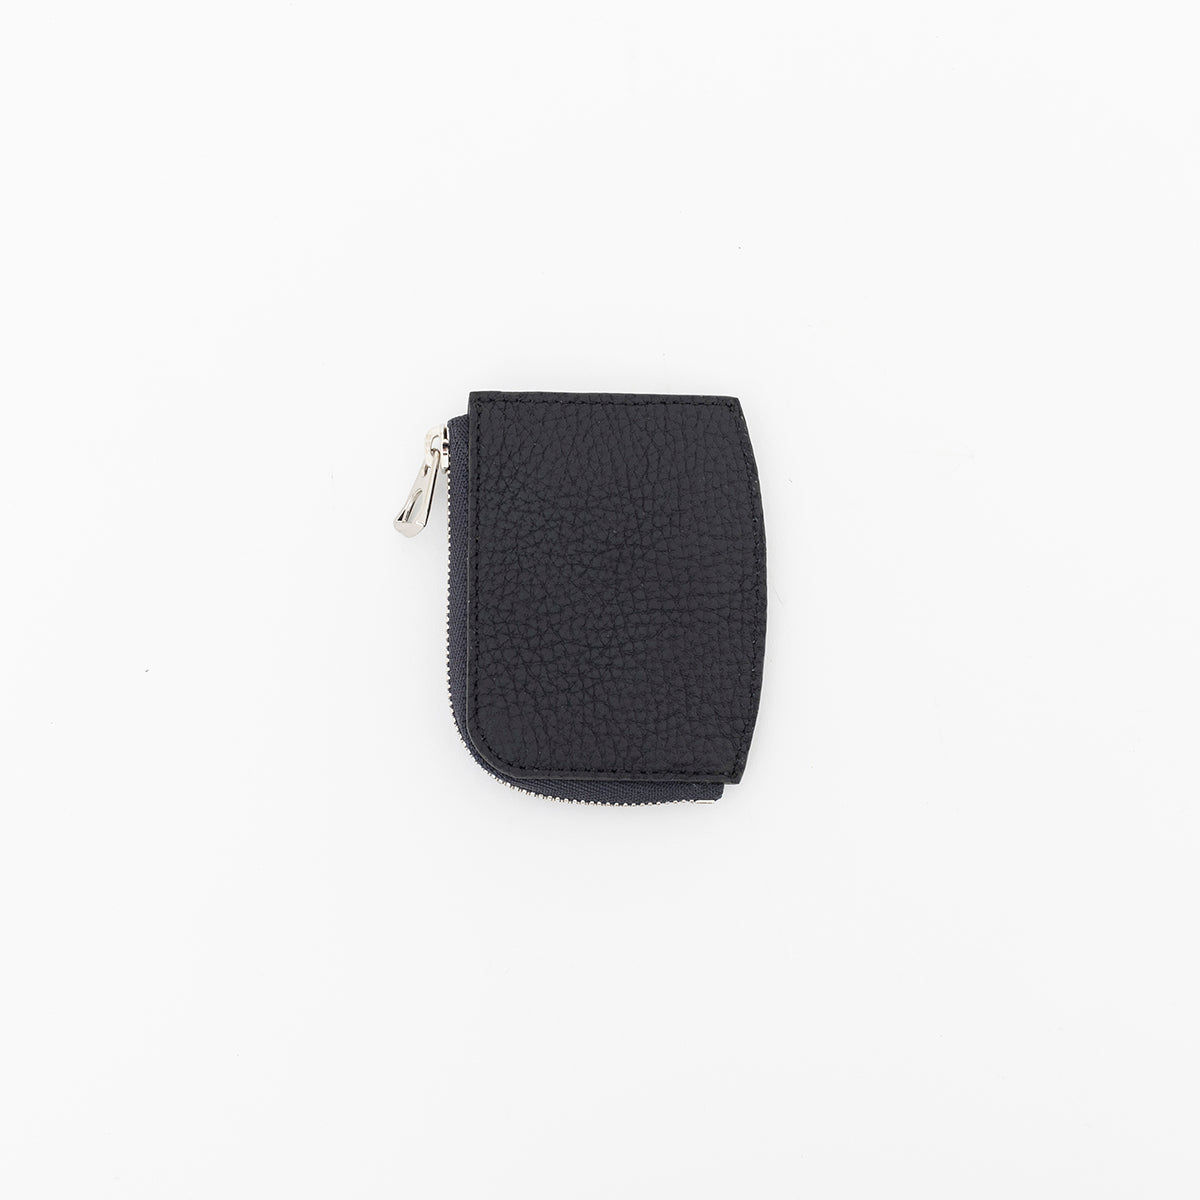 CRISTY KEY COIN CASE / DIPLO FJORD (クリスティキーコインケース